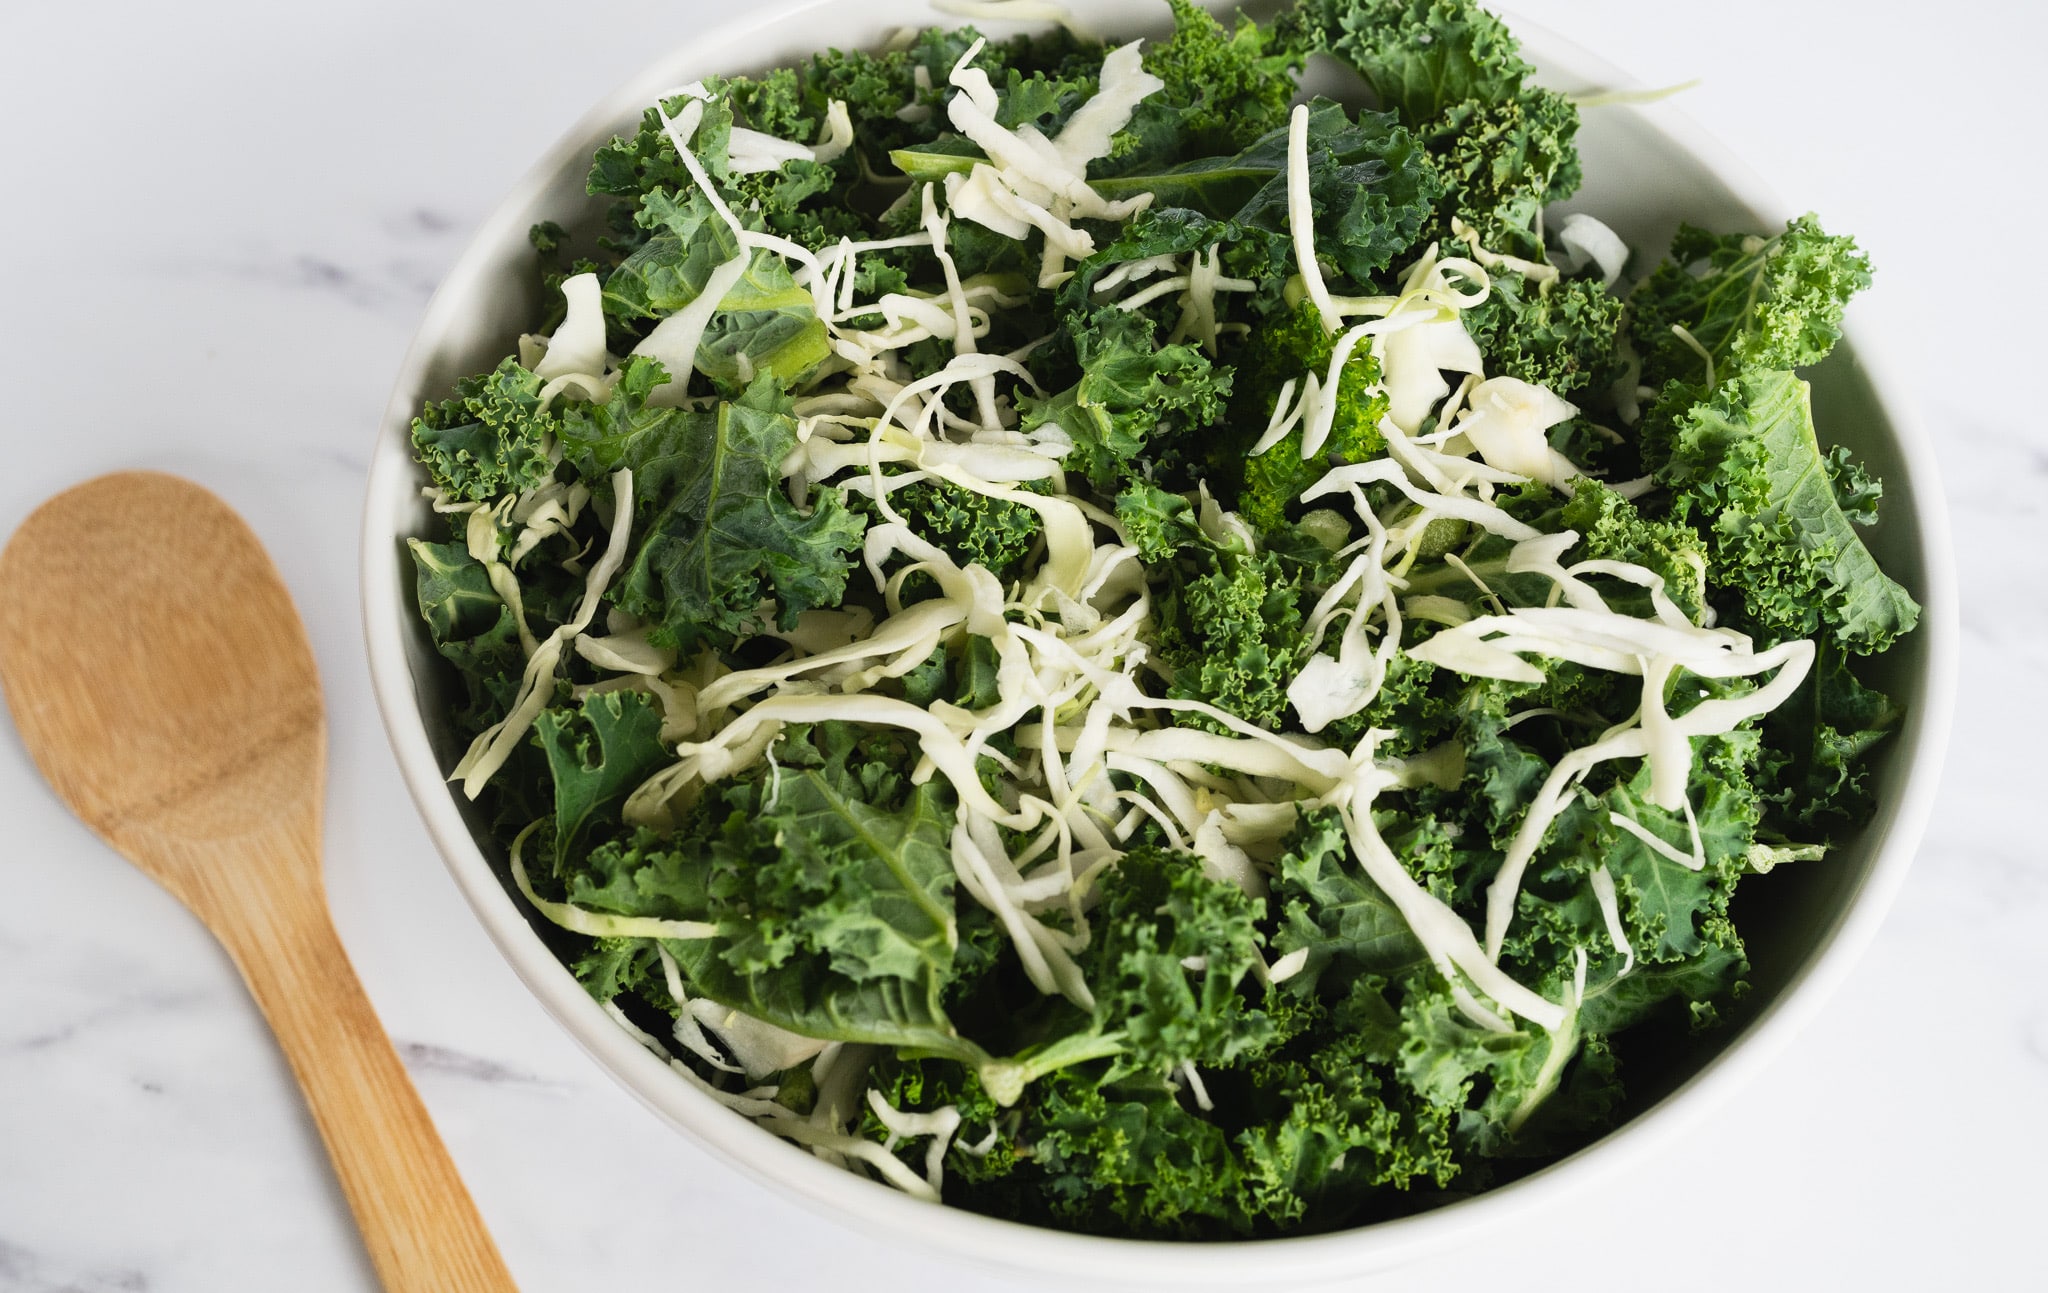 A process image showing a mixture of chopped kale and shredded cabbage in a white bowl, with a wooden spoon placed next to it, set against a clean white background, illustrating a step in the preparation of the Kale Crunch Salad recipe.